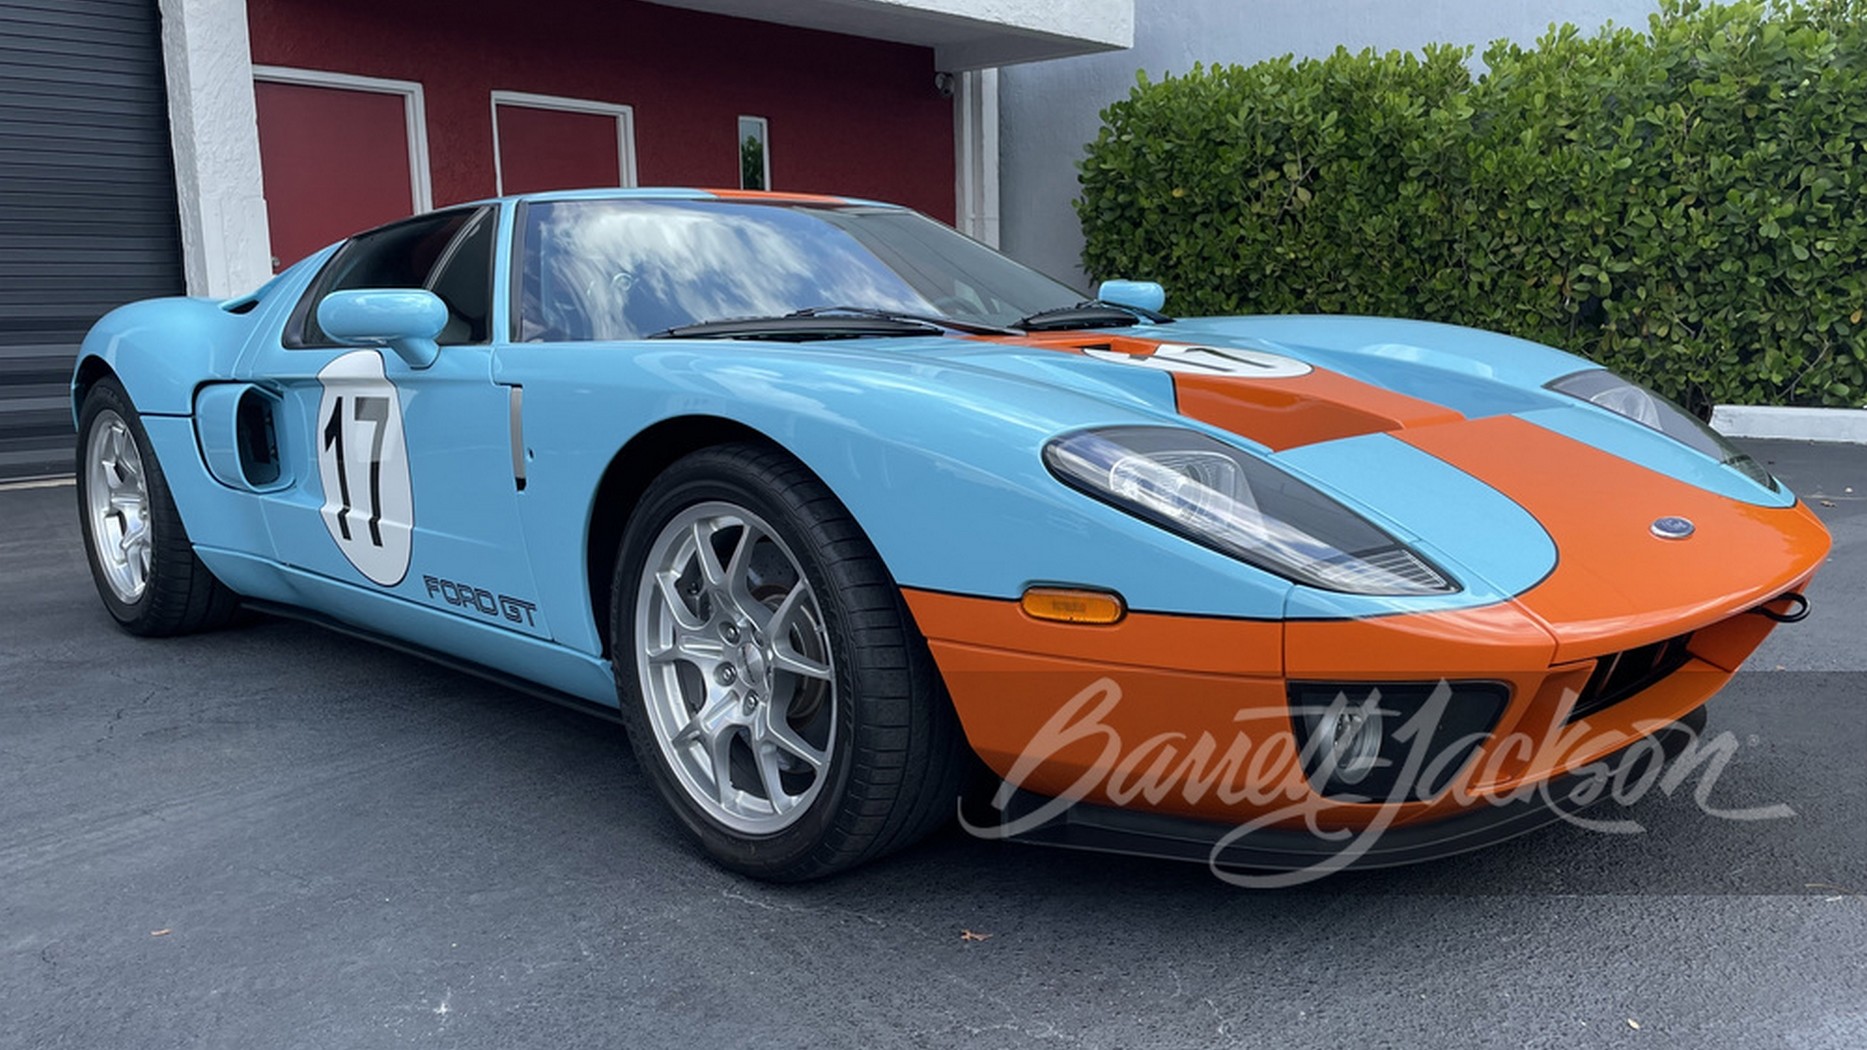 Police Claim $704,000 Ford GT Crashed Because of Stick Shift – Owner ...